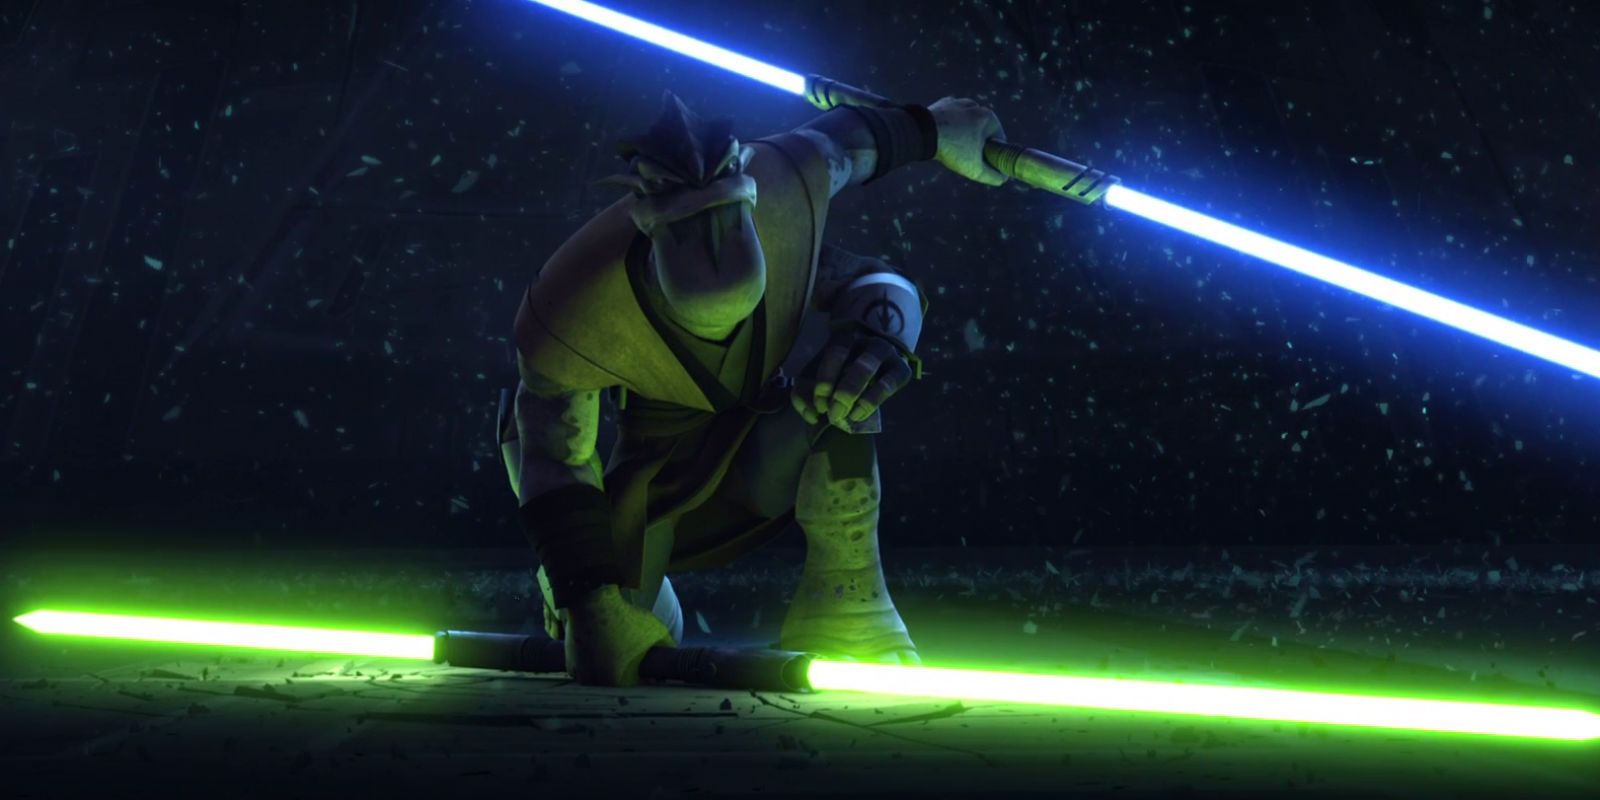 Pong Krell in Star Wars The Clone Wars